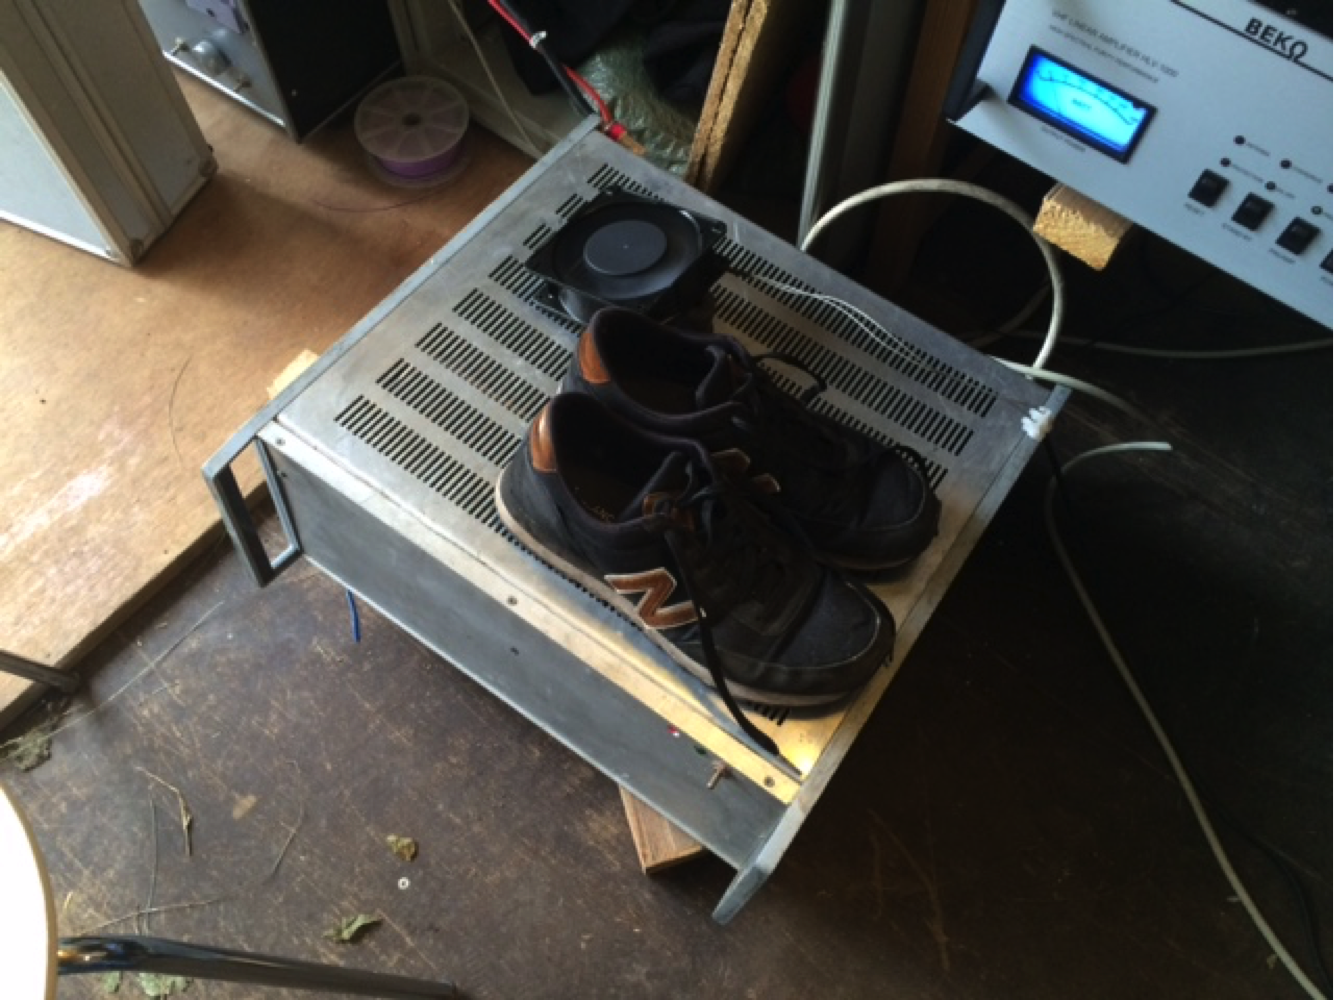 Drying shoes on the PA